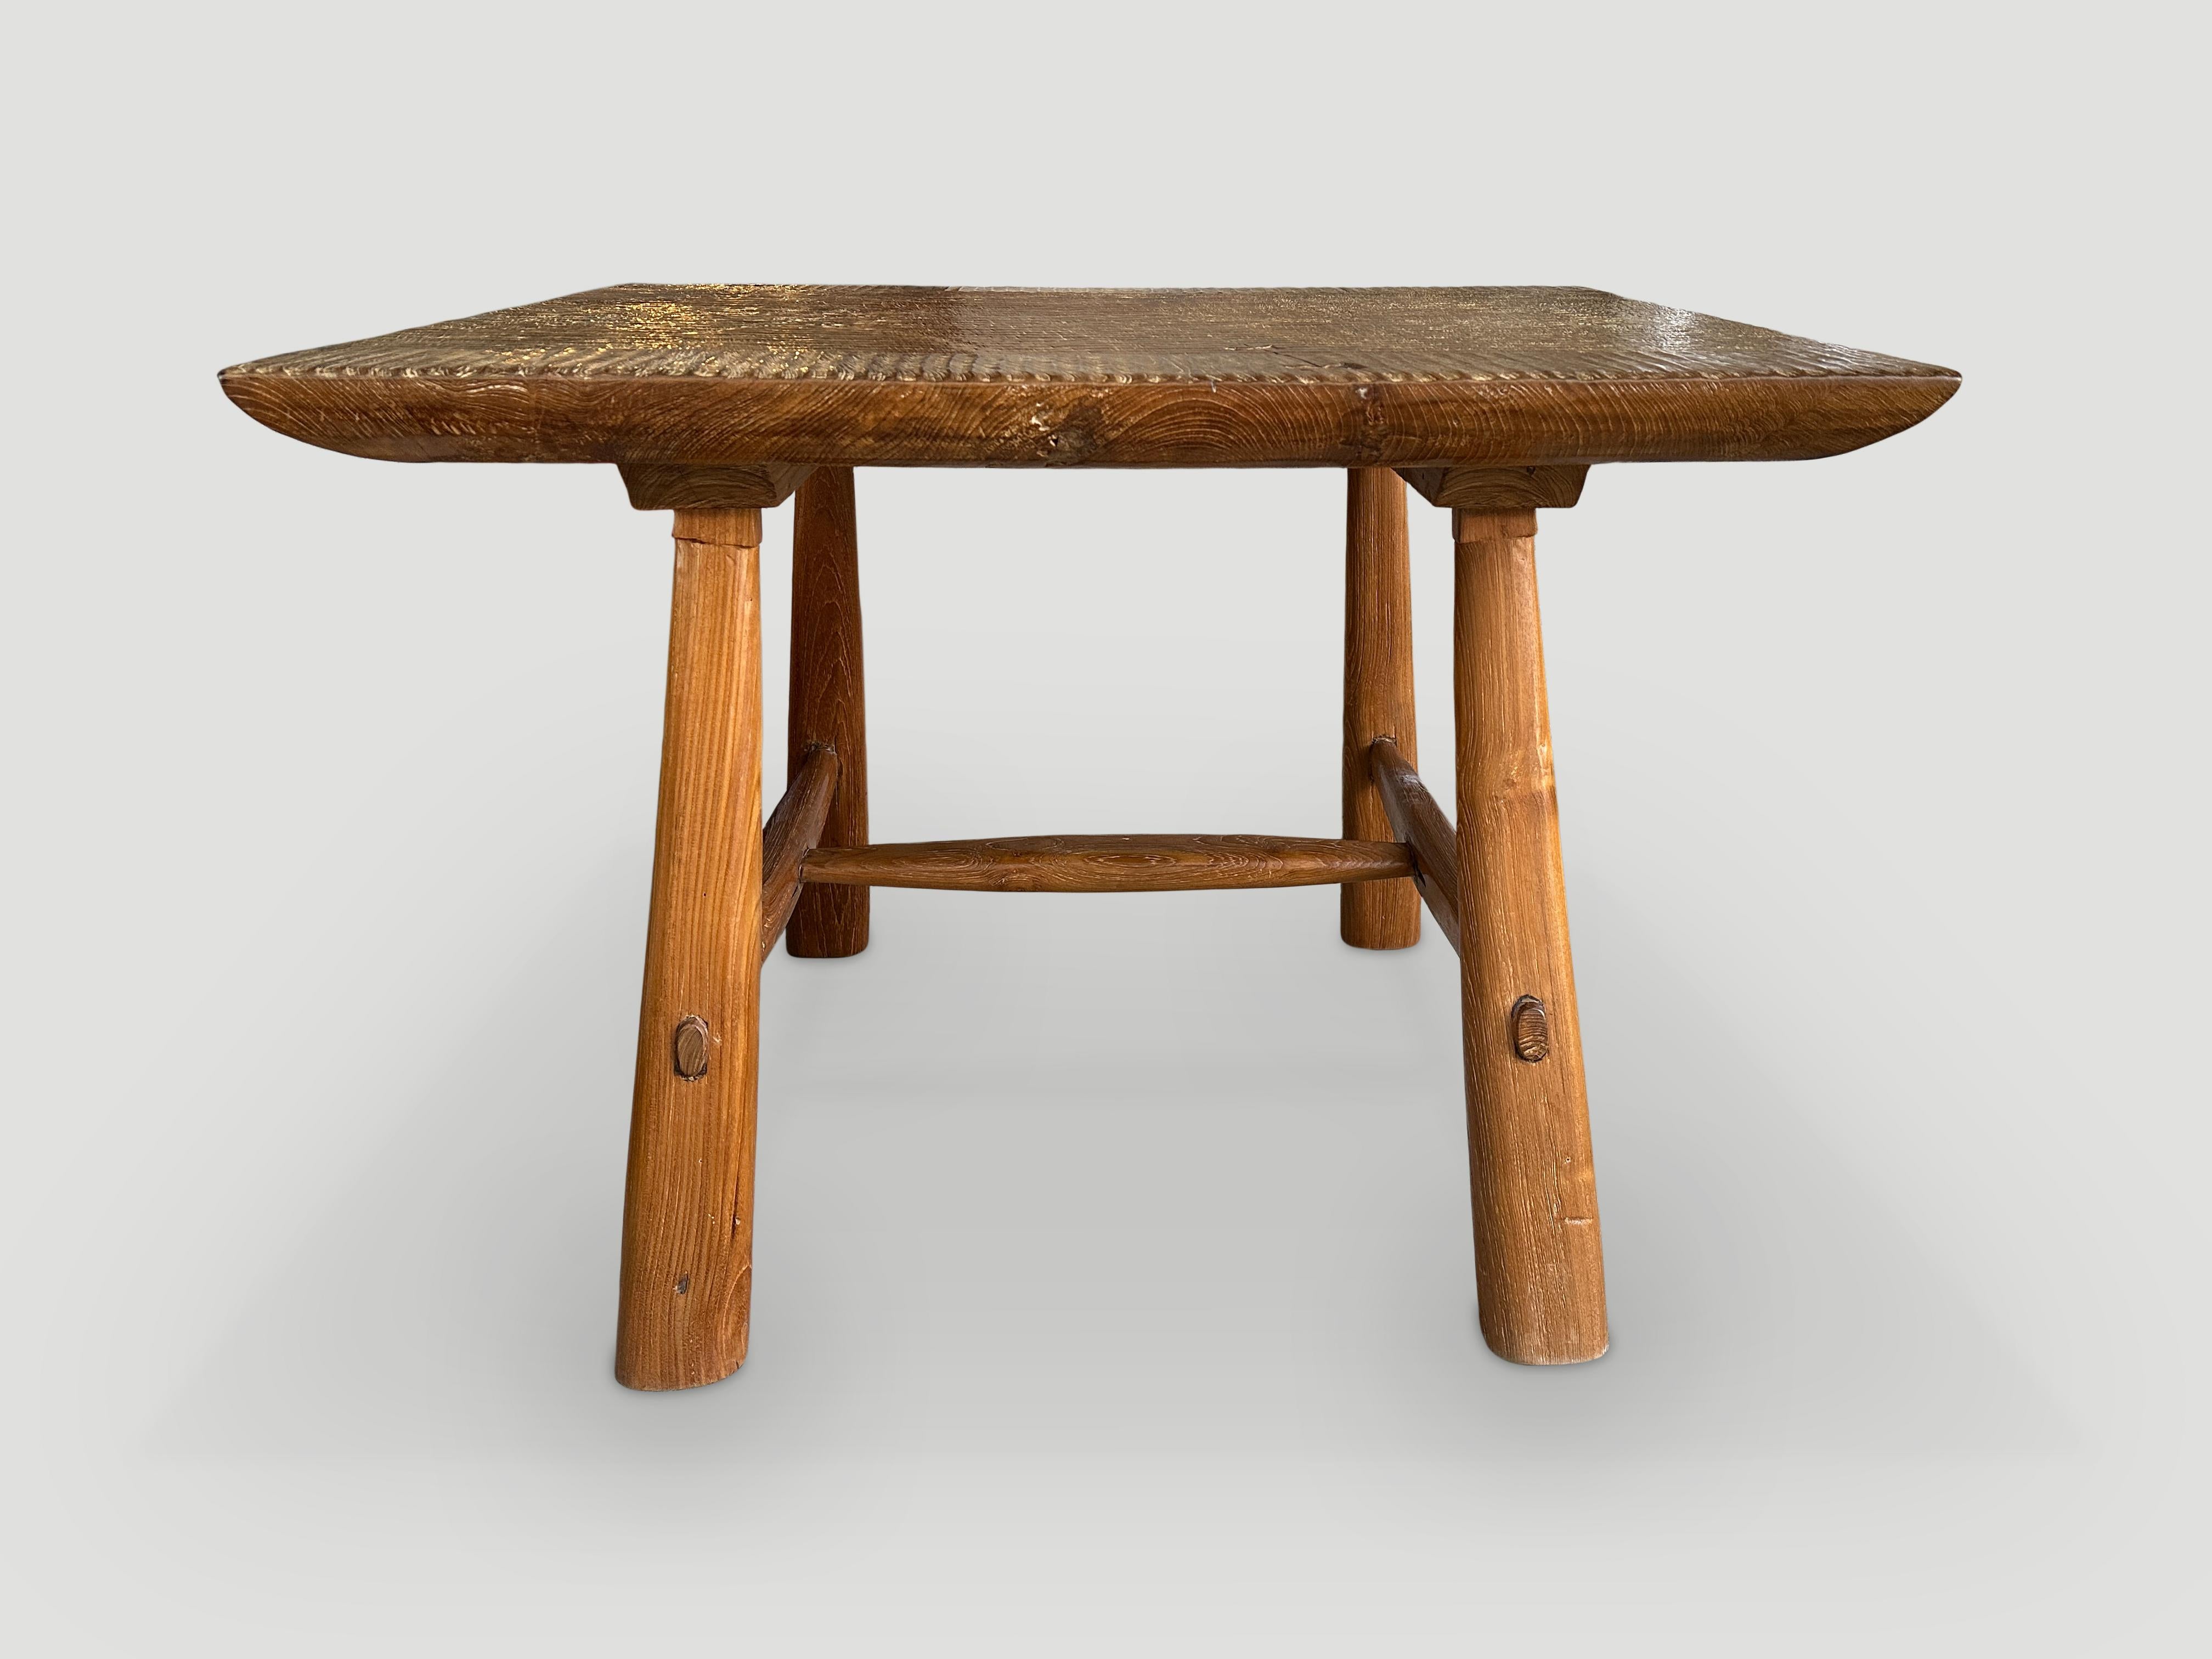 Andrianna Shamaris Hand Carved Teak Wood Dining Table, Side Table, Entry Table For Sale 1